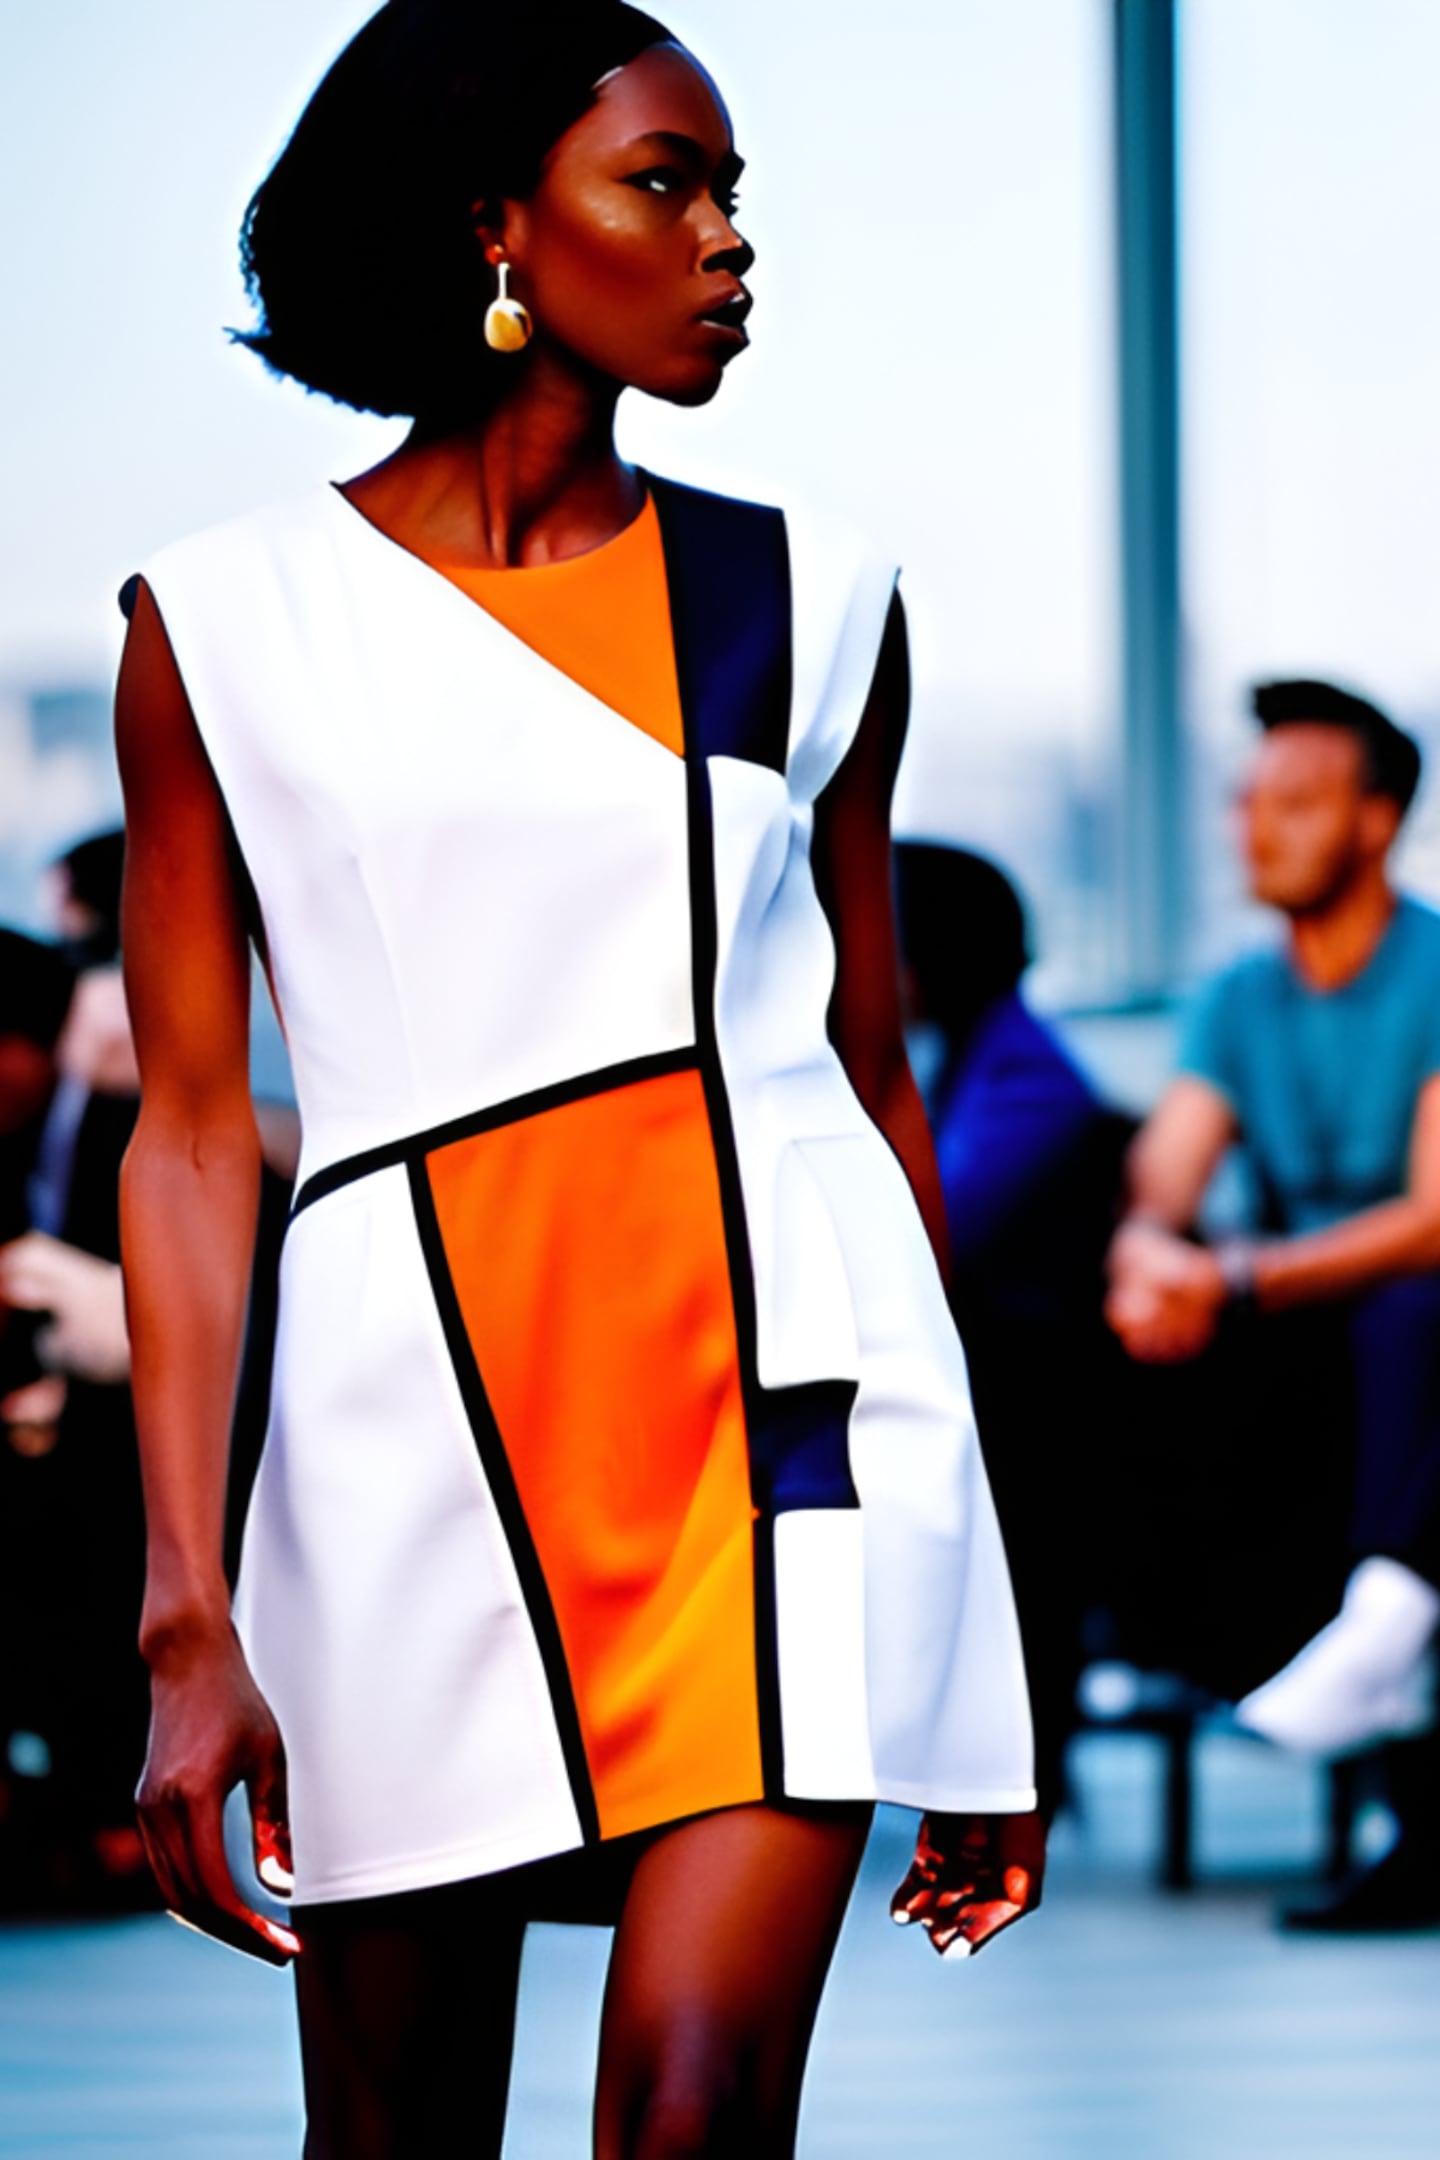 An AI-generated image depicting a model walking a runway wearing a white minidress with colorblock detailing.